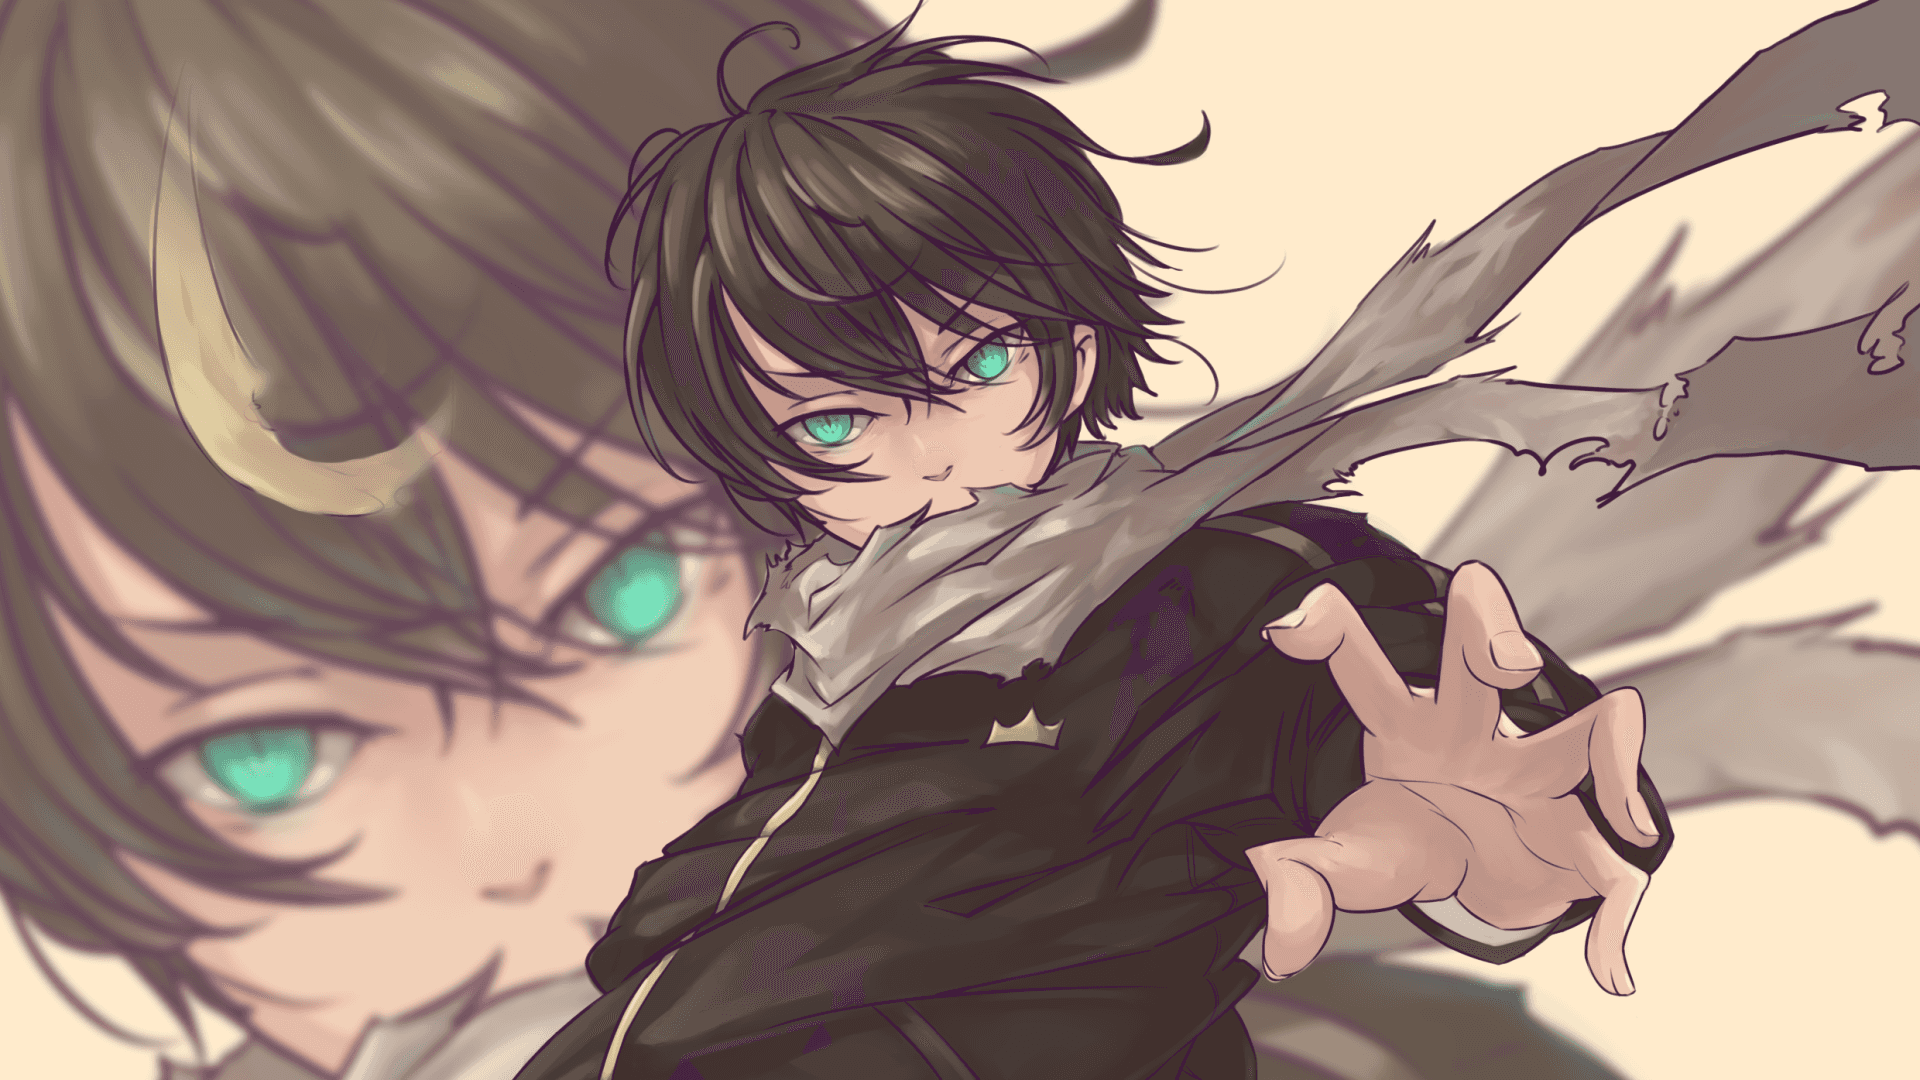 Yato, God of Fortune and Happiness